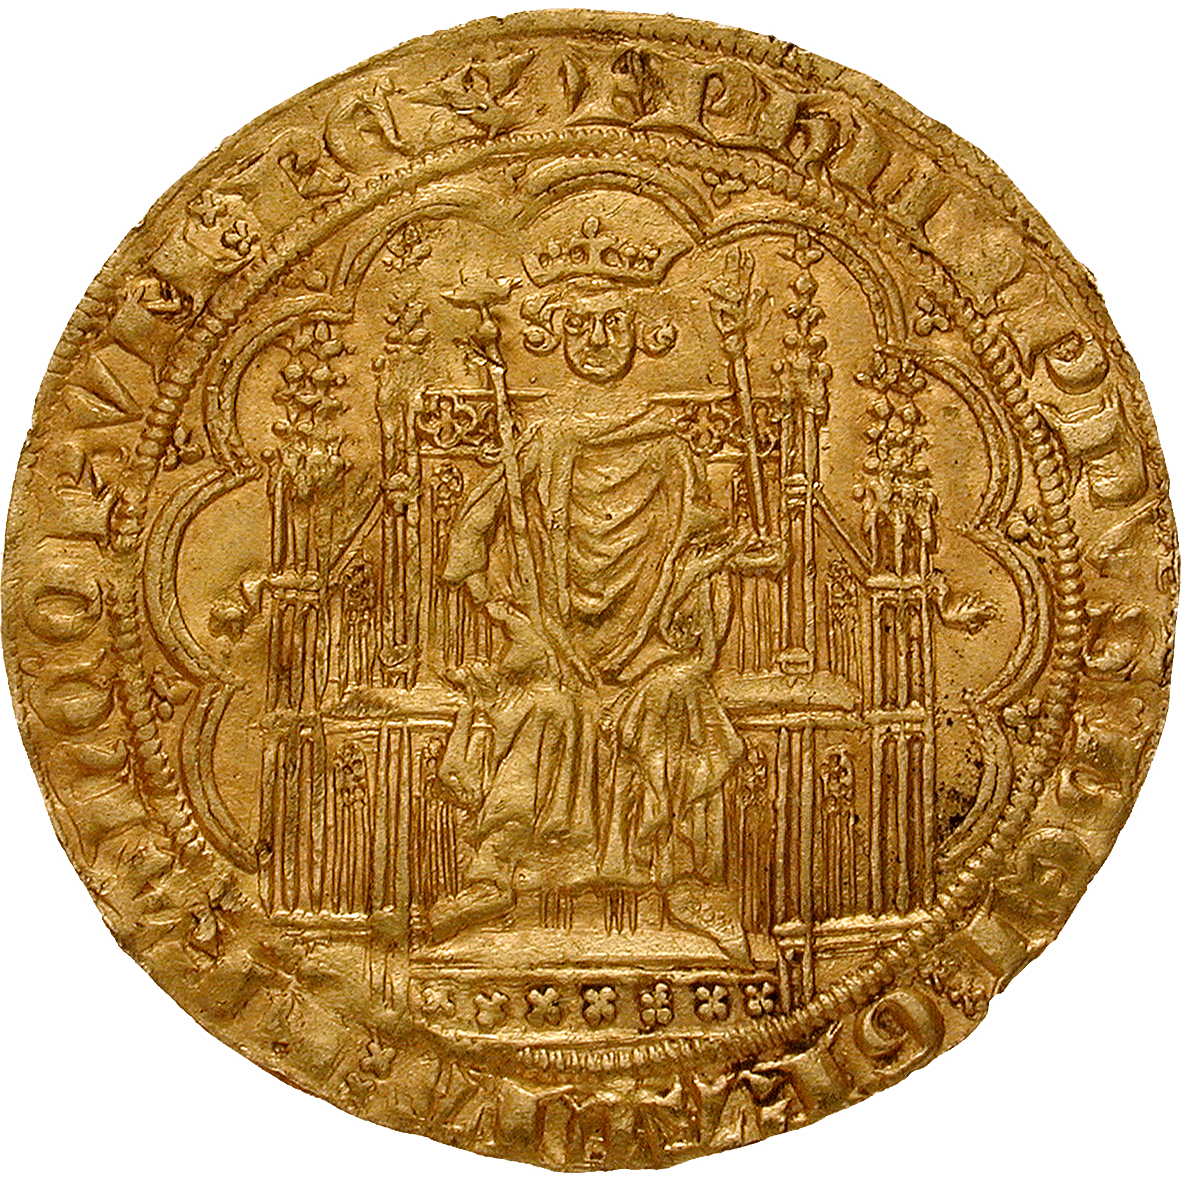 Kingdom of France, Philip VI of Valois, Chaise d'or (obverse)